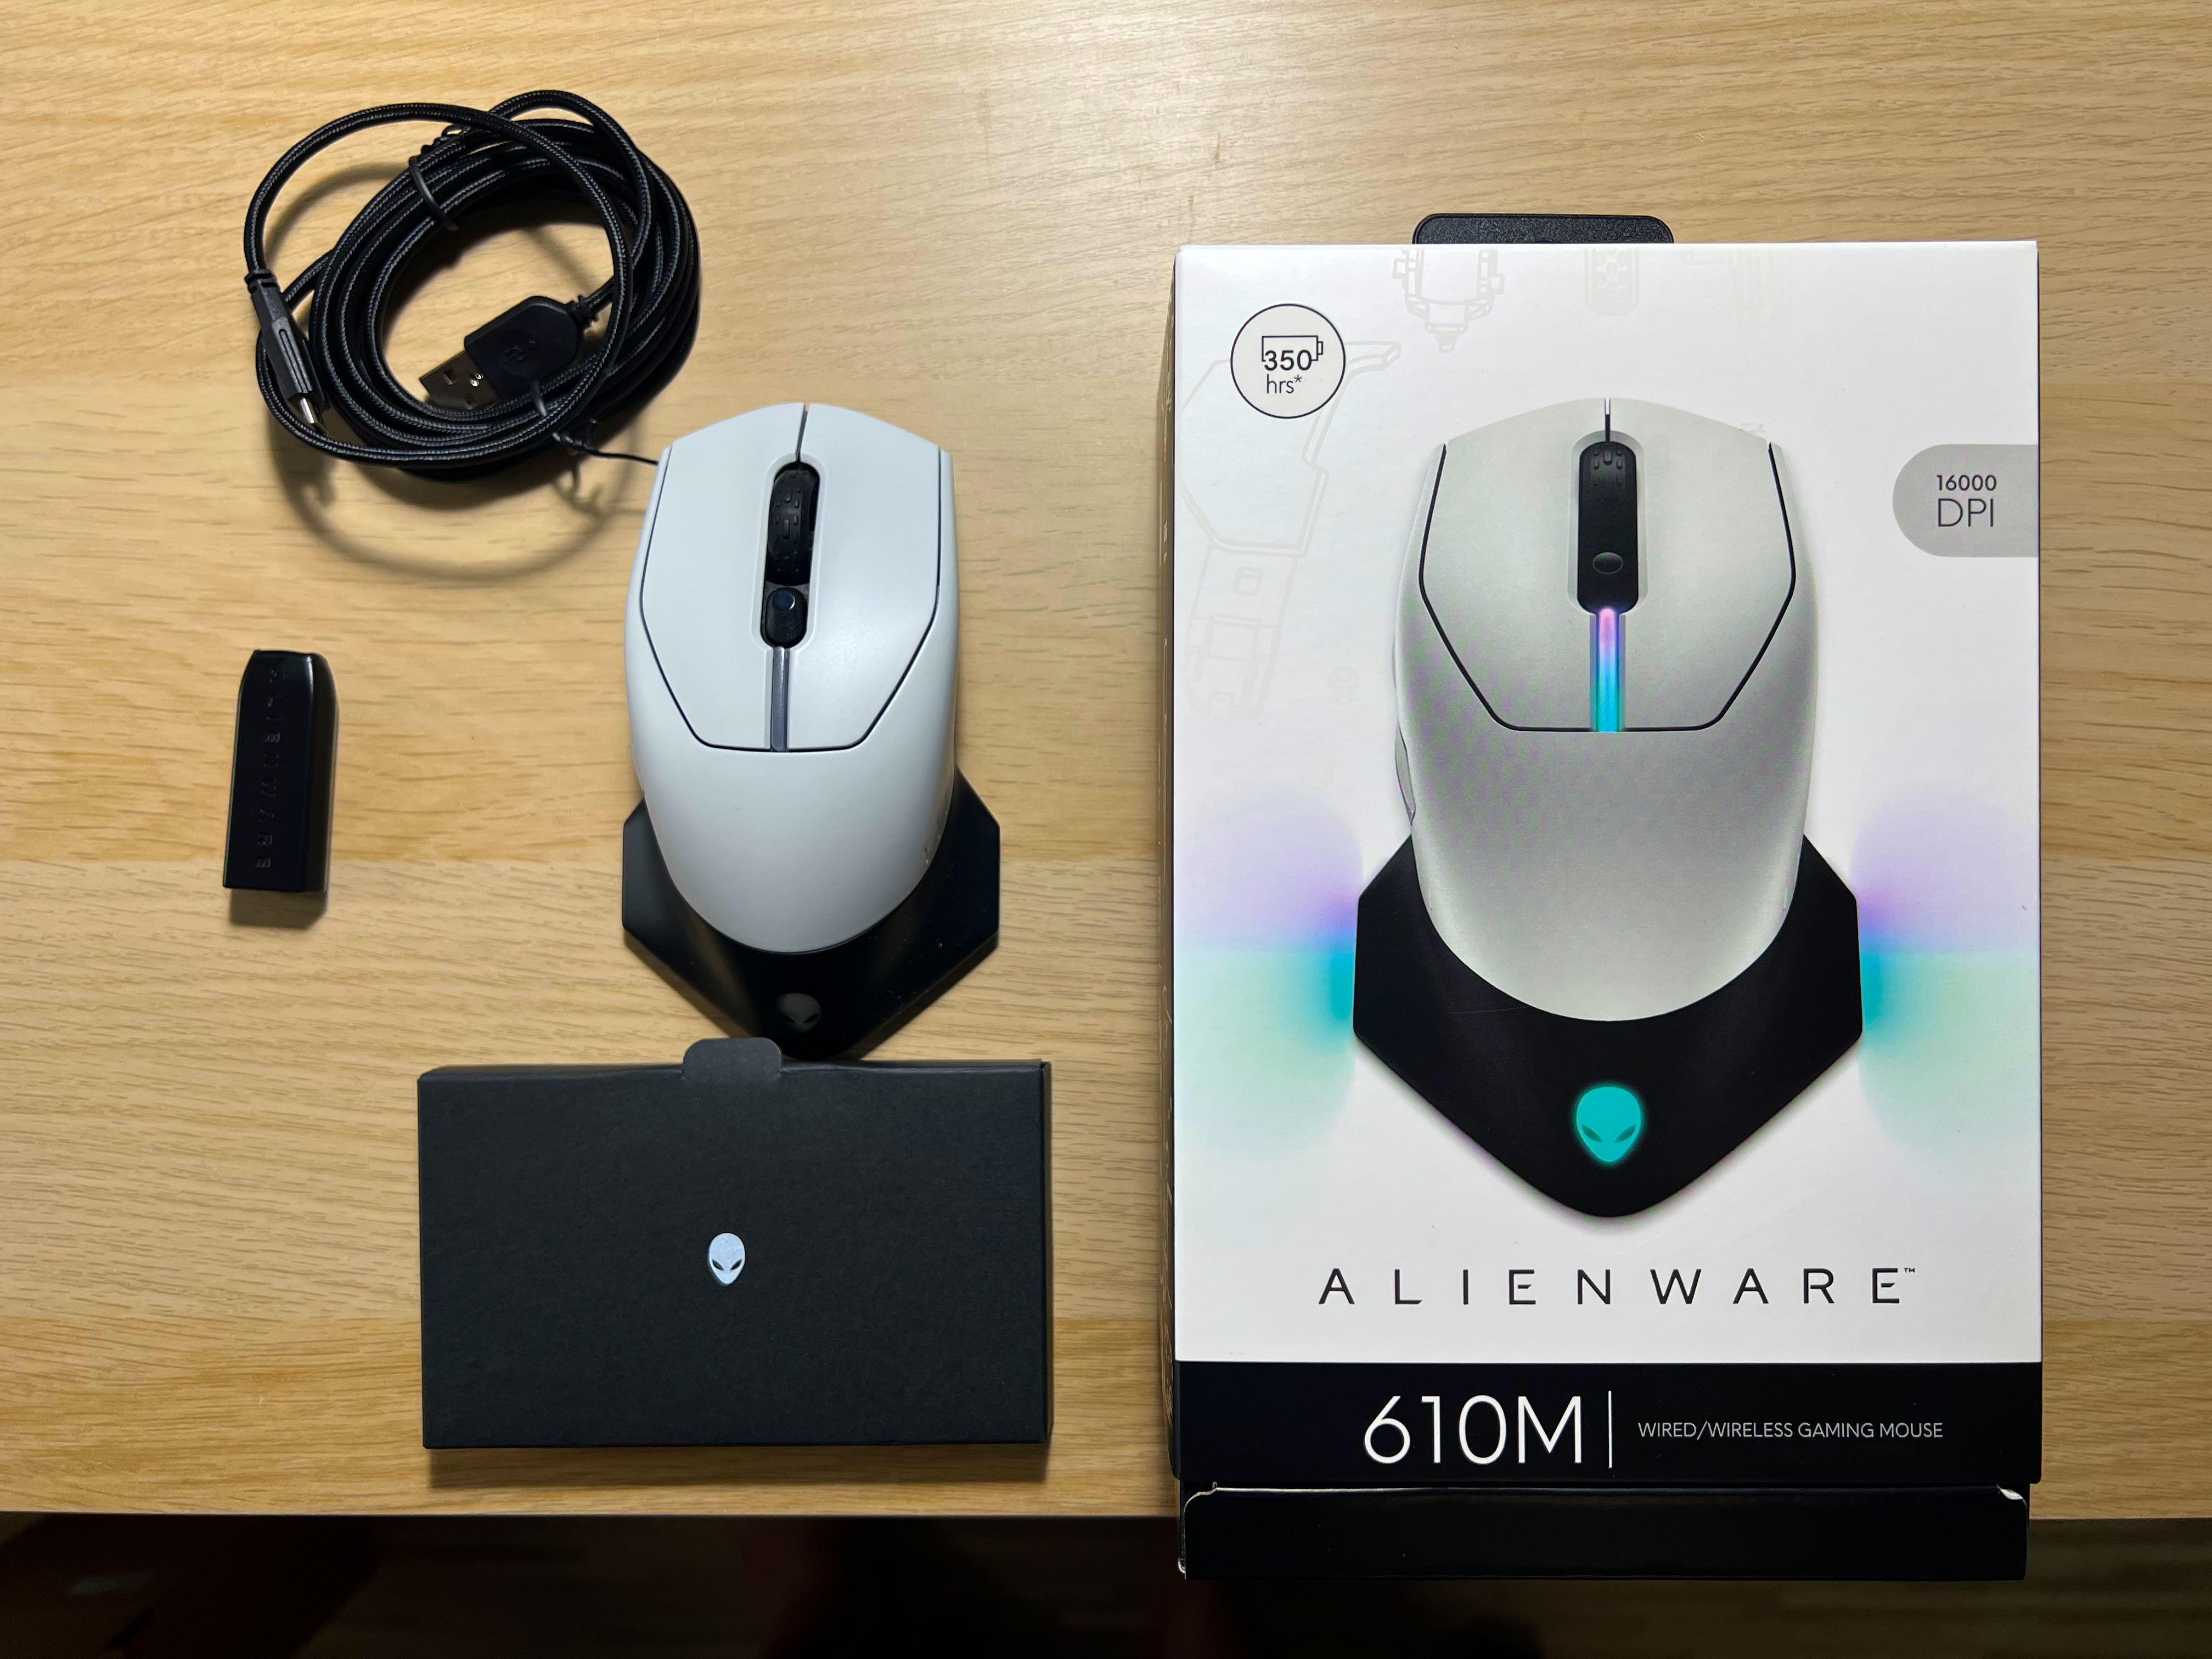 Alienware Aw610m Gaming Mouse Rbg Mouse Pad Computers Tech Parts Accessories Mouse Mousepads On Carousell